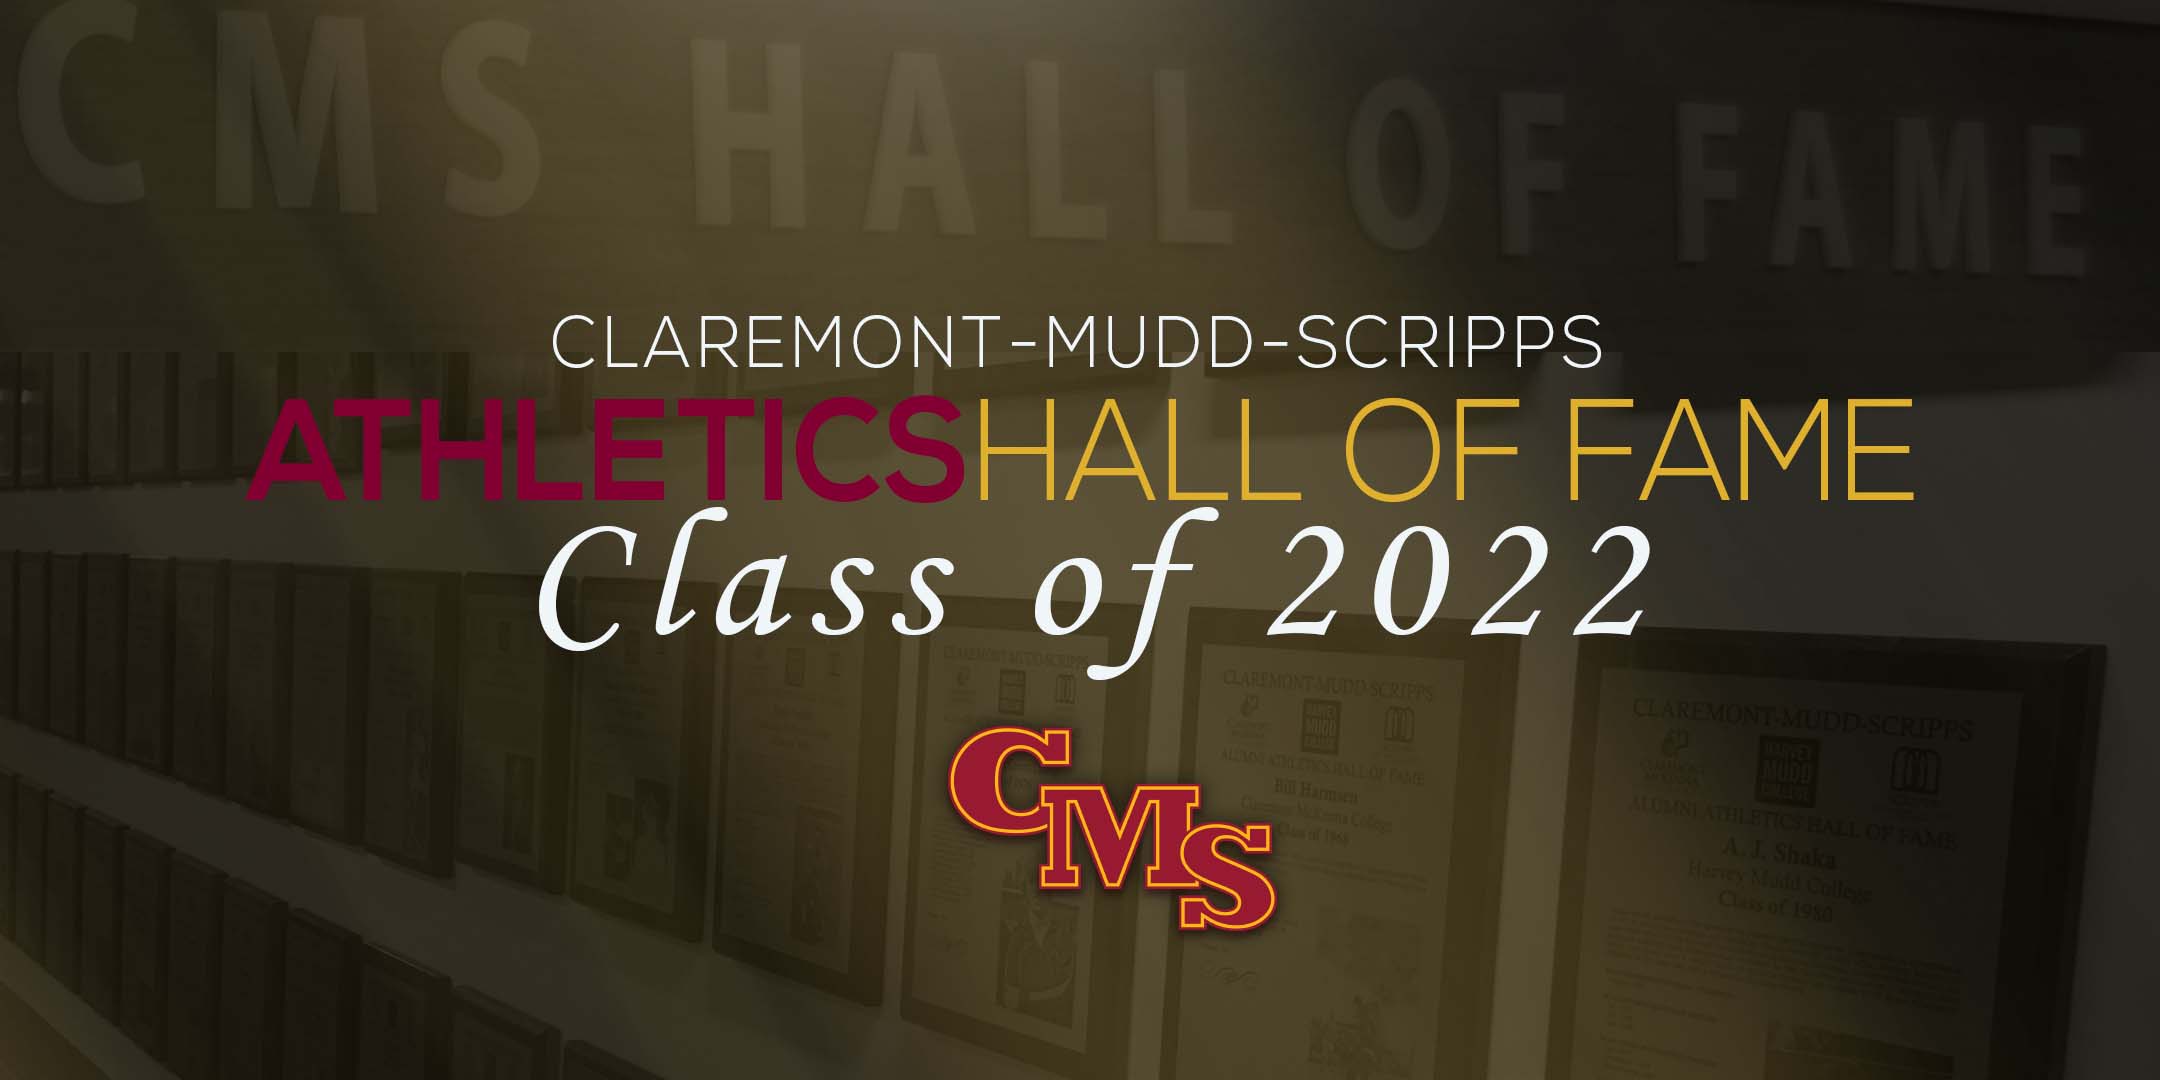 Claremont-Mudd-Scripps Athletics Hall of Fame Class of 2022